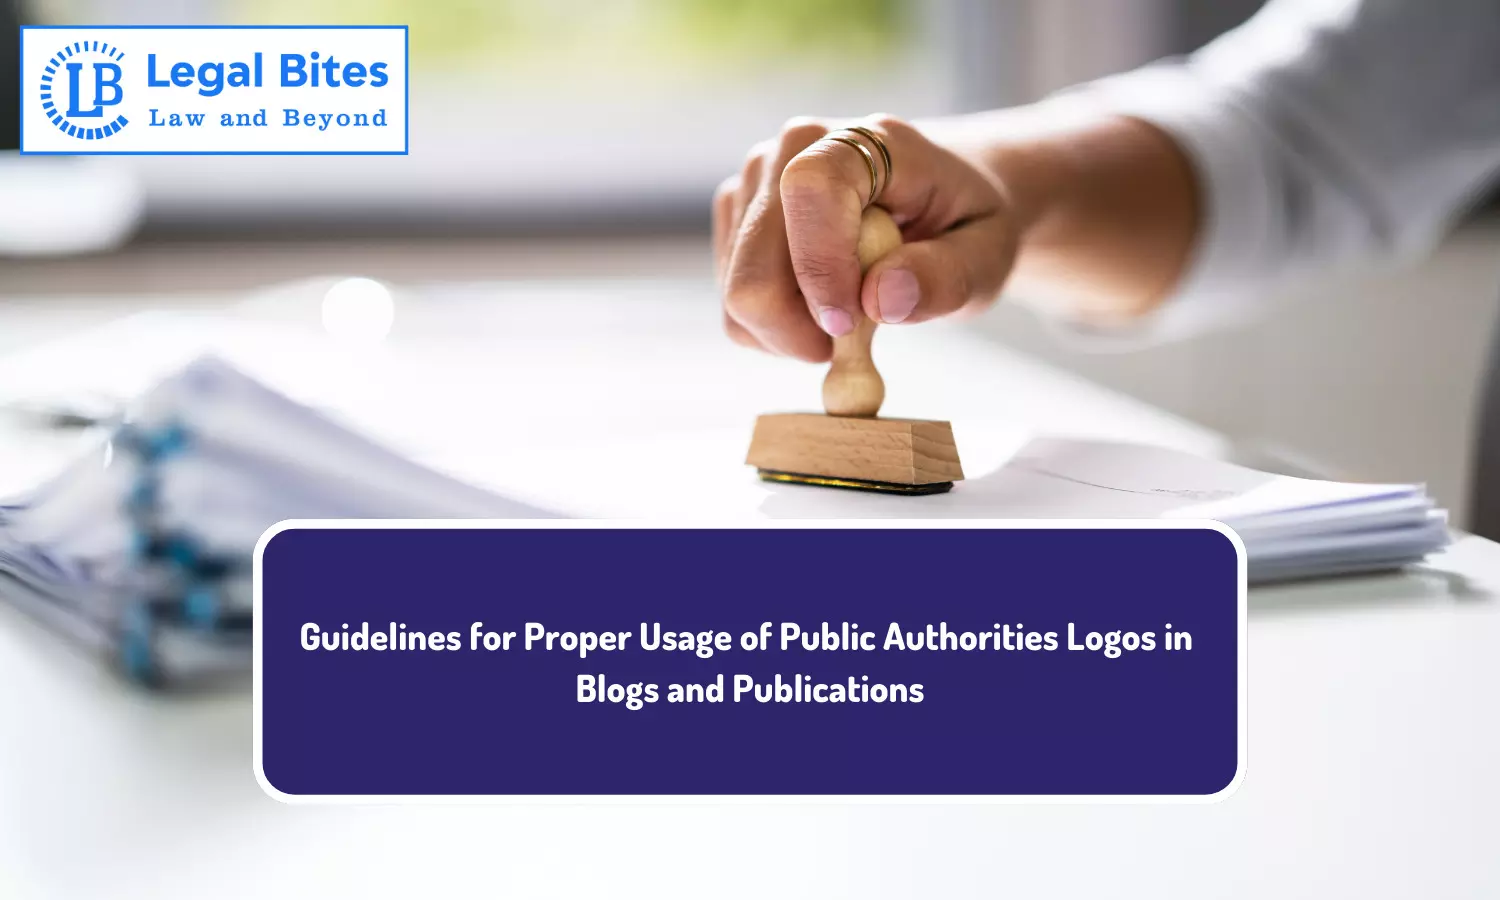 Guidelines for Proper Usage of Public Authorities Logos in Blogs and Publications